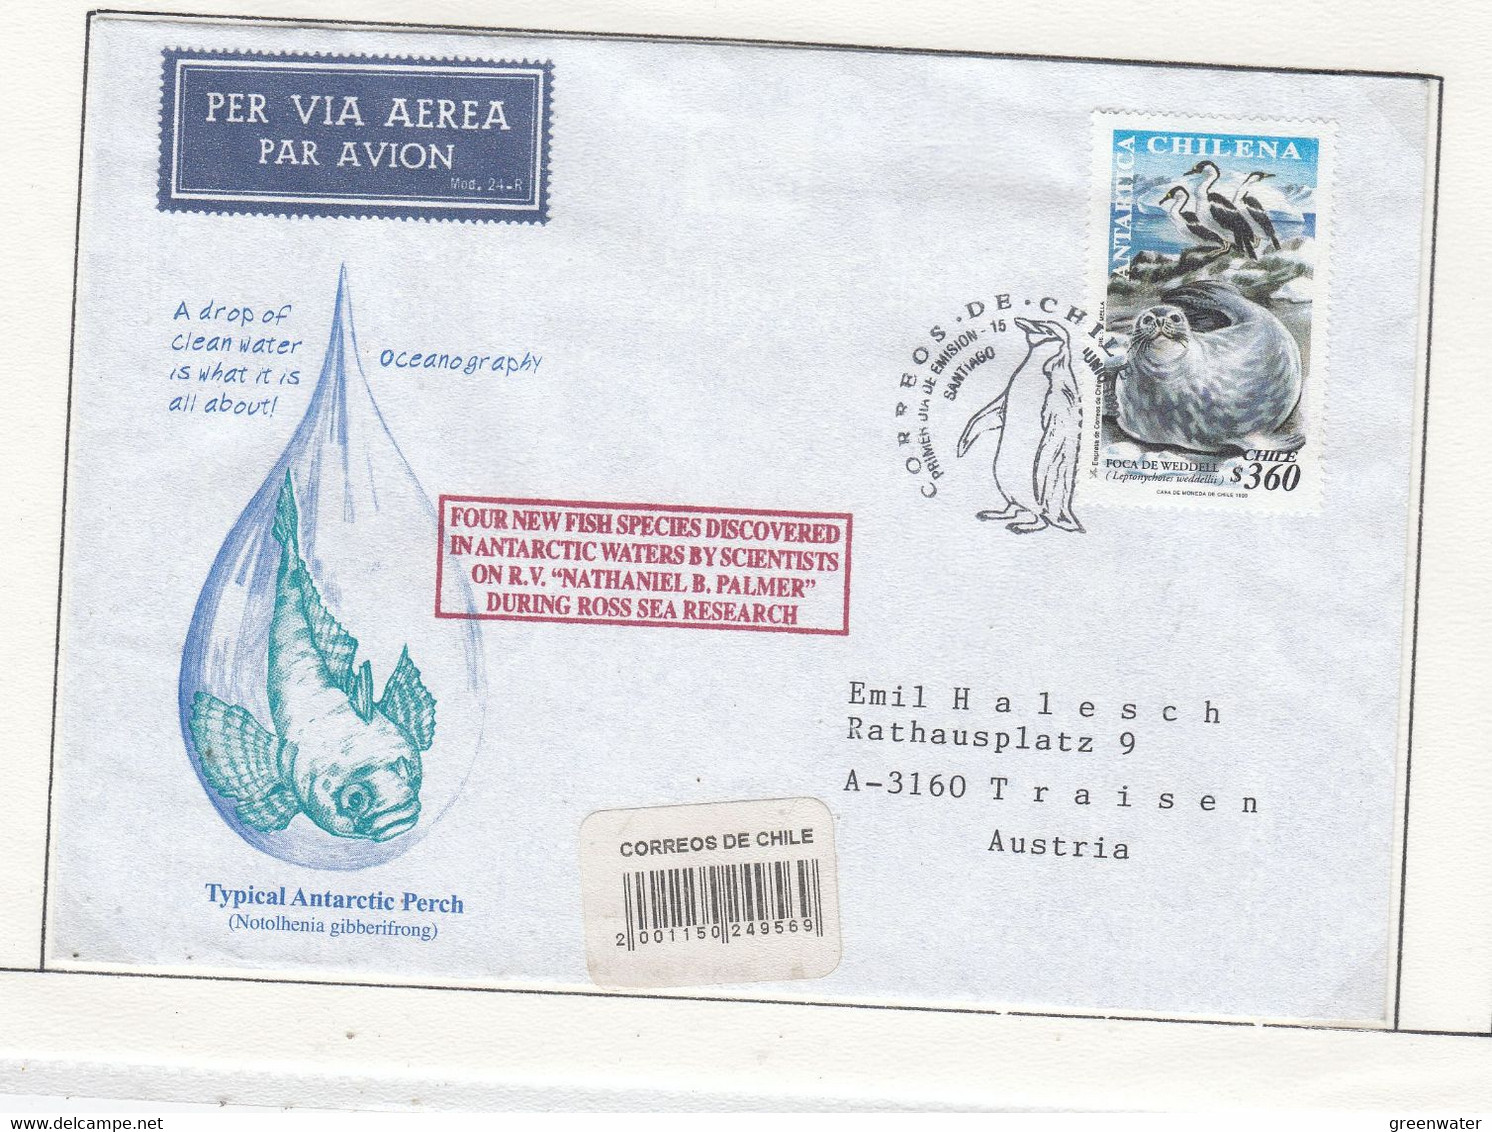 CHILE 1998 Cover "4 New Fish Discovered In The Antarctic Waters" Ca 1998 (CH163A) - Programmes Scientifiques